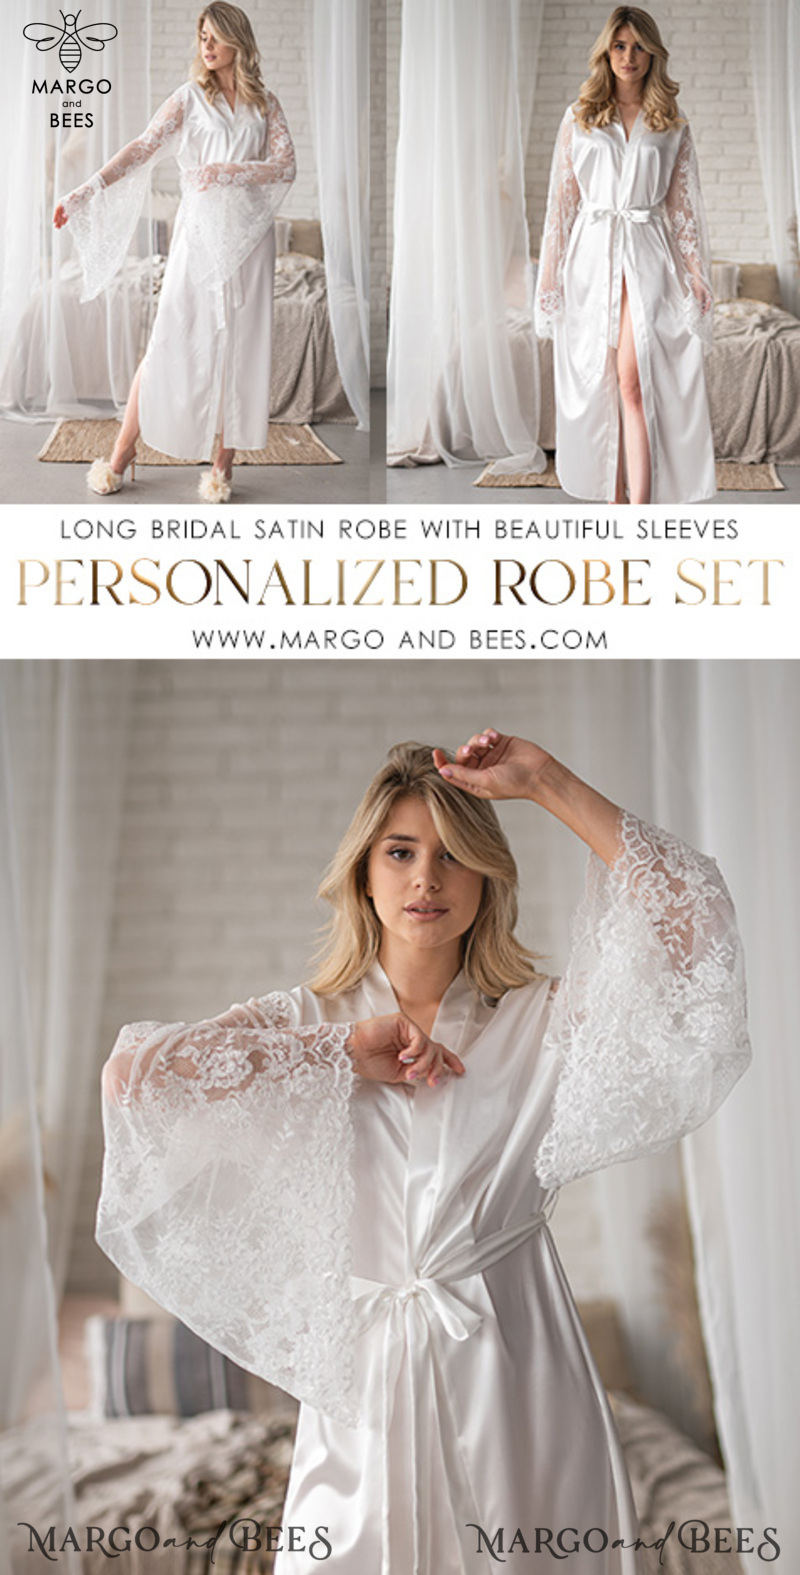 Personalised Satin Robes, Luxury Bride Dressing Gowns, Sexy Lace sleeves Wedding Robes, Get Ready Bridal Robes with name on it, Hen Party Lace Silk Robes -1